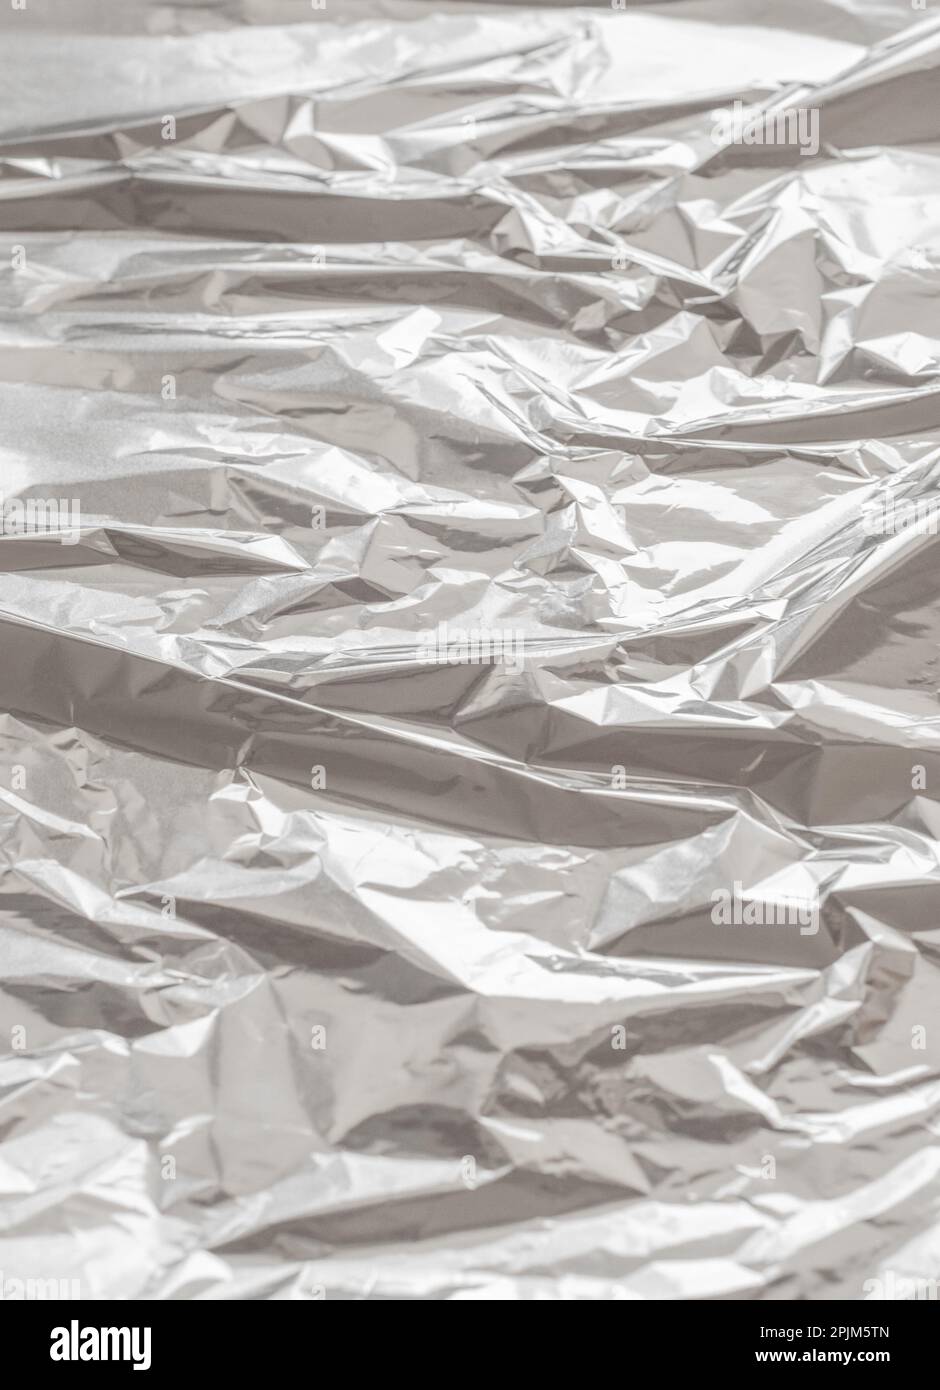 Metallic foil texture. Metallic background. Metal glittering, crushed, glister surface, backdrop. Crumpled texture. Reflective surface. Folded, rumple Stock Photo